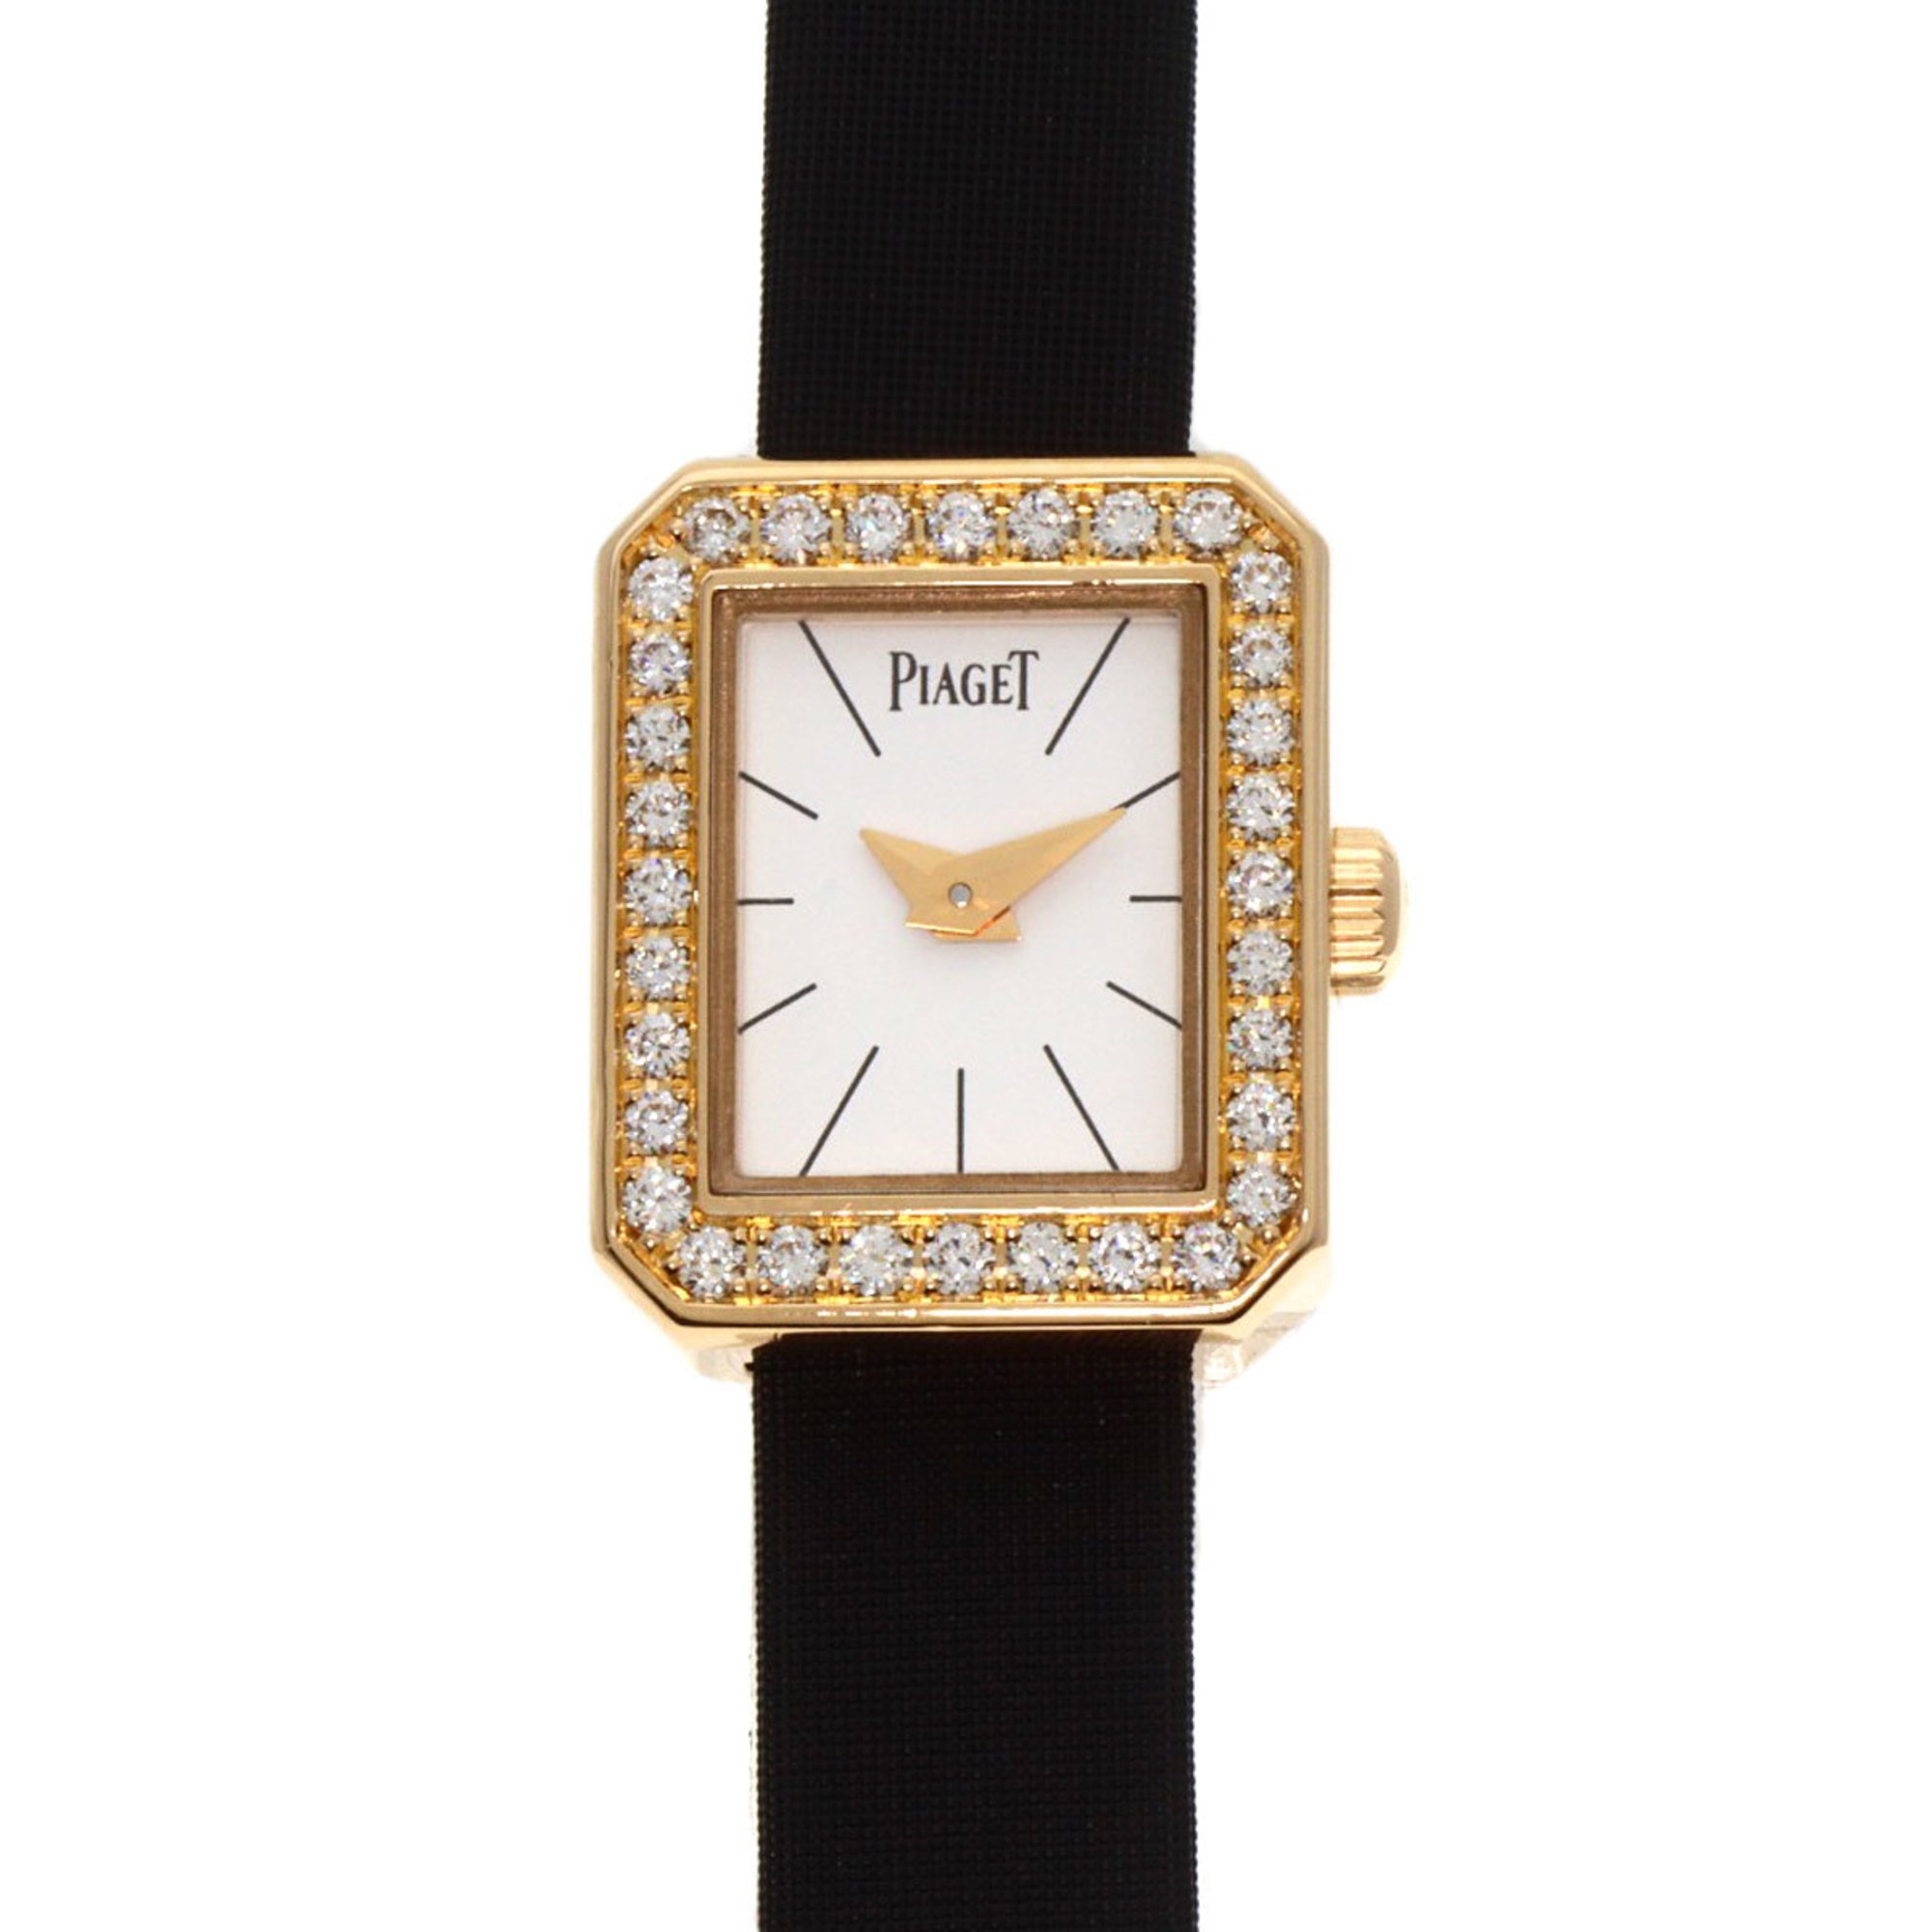 Piaget P10691 Protocol Bezel Diamond Manufacturer Complete Watch K18 Yellow Gold/Leather Women's PIAGET